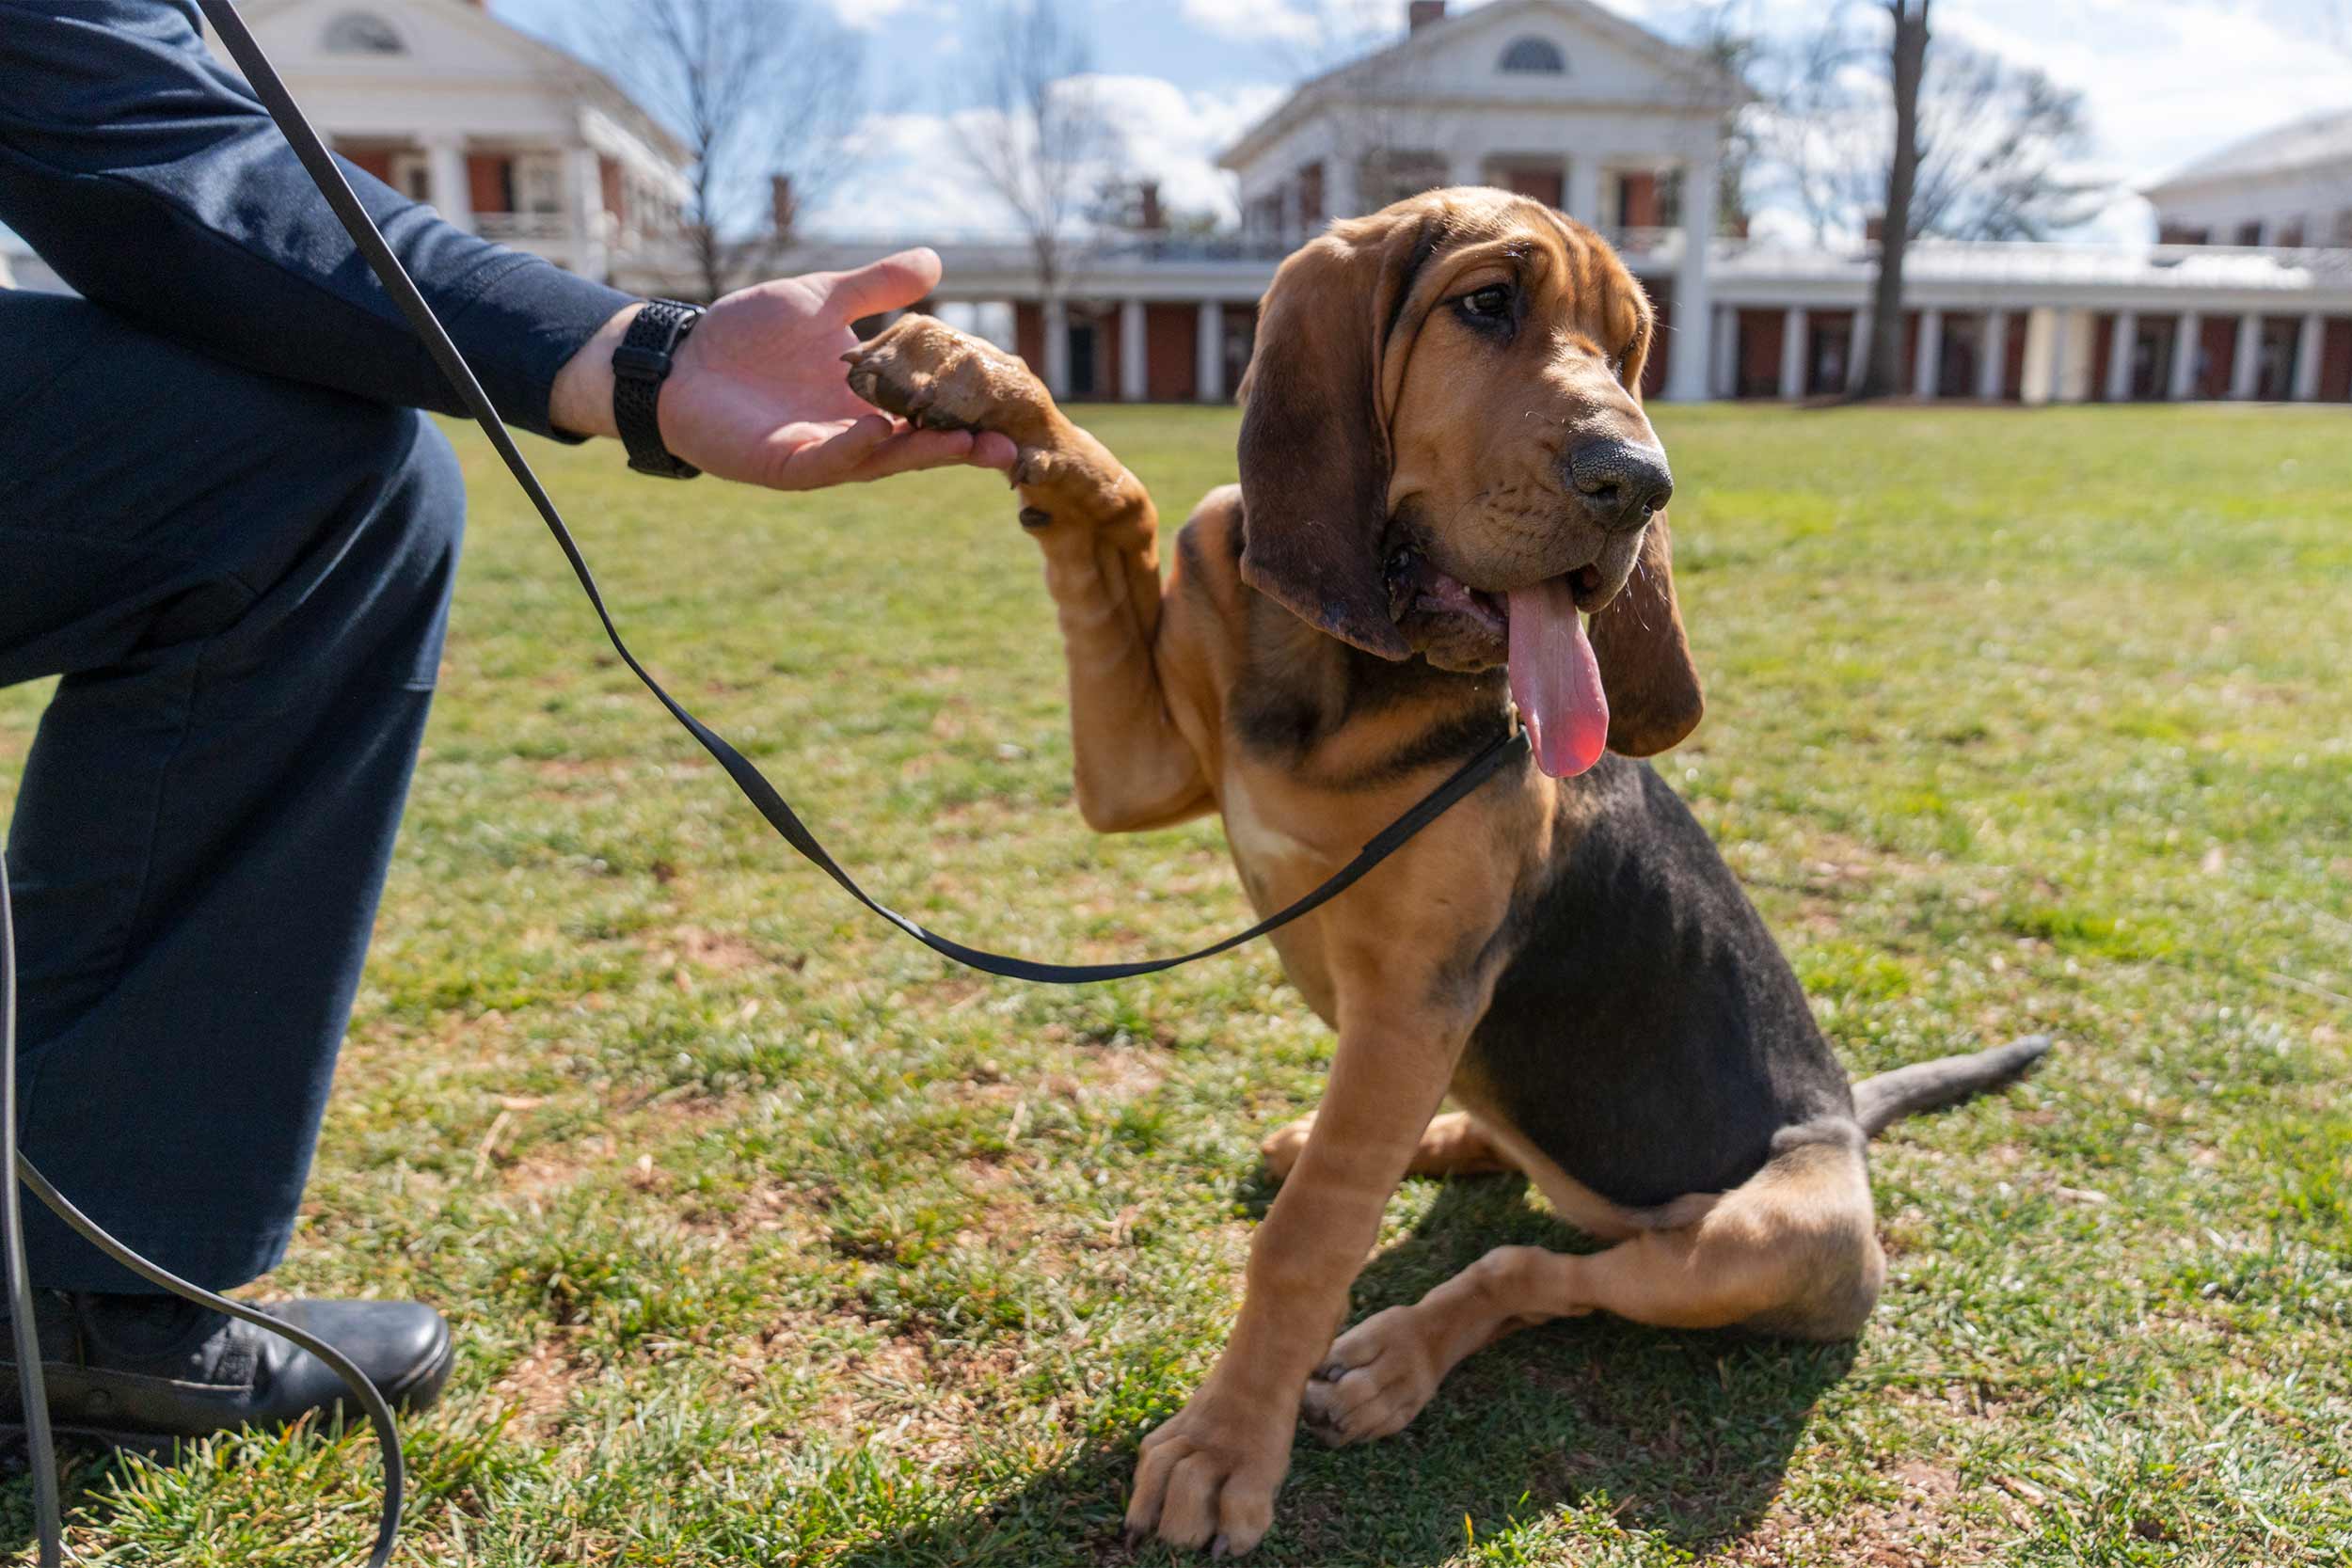 Maggie, the bloodhound, shaking hands with her handler on the Lawn